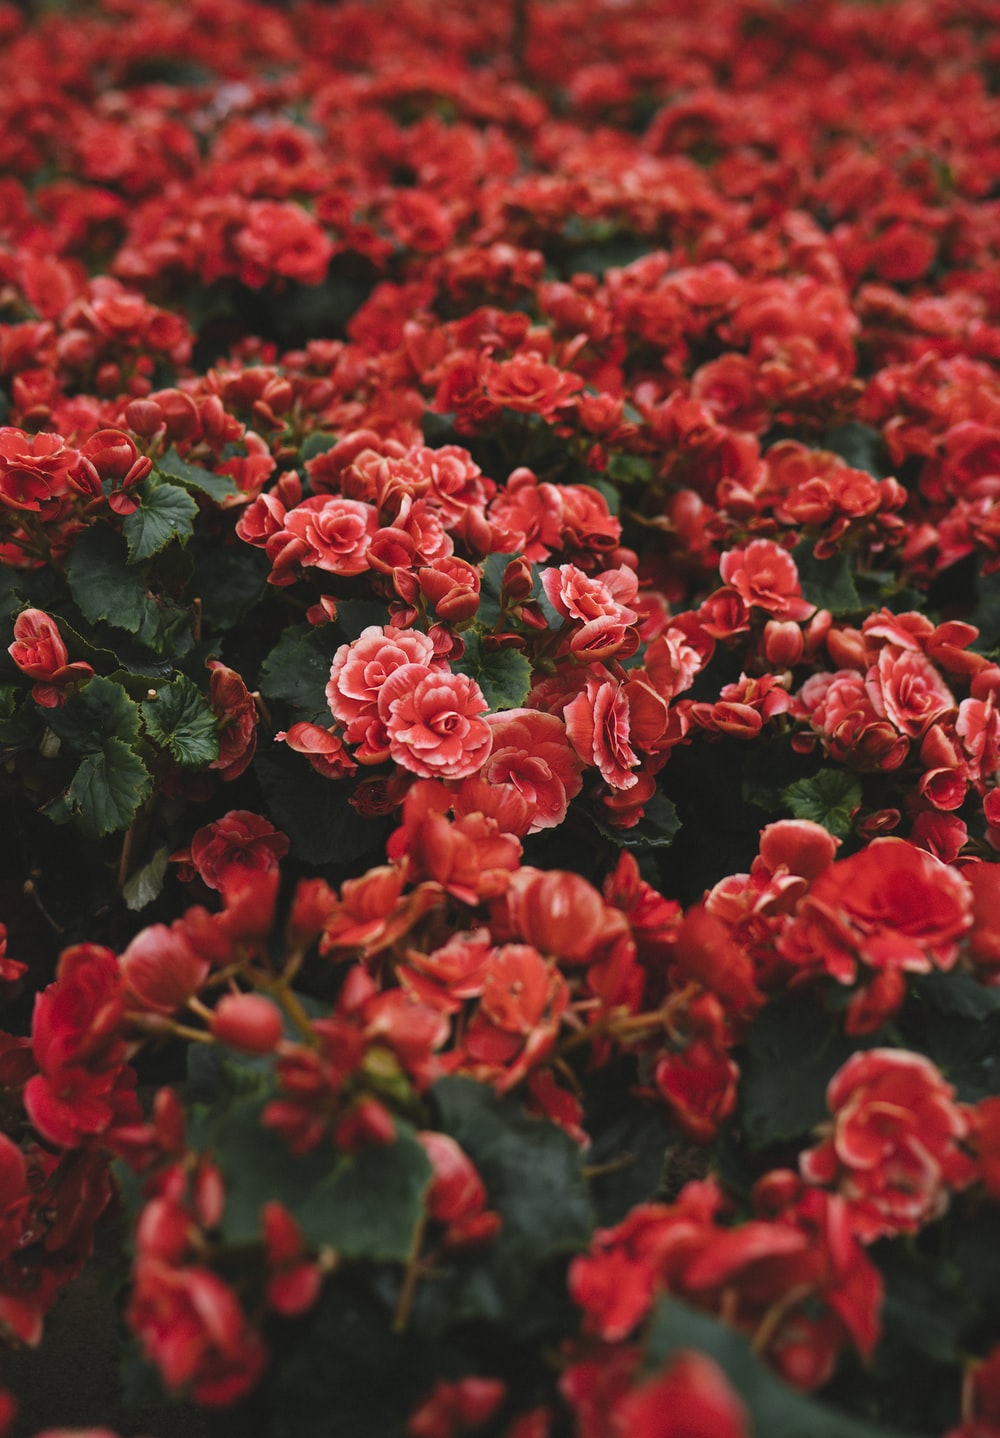 Red Plants Picture. Download Free Image